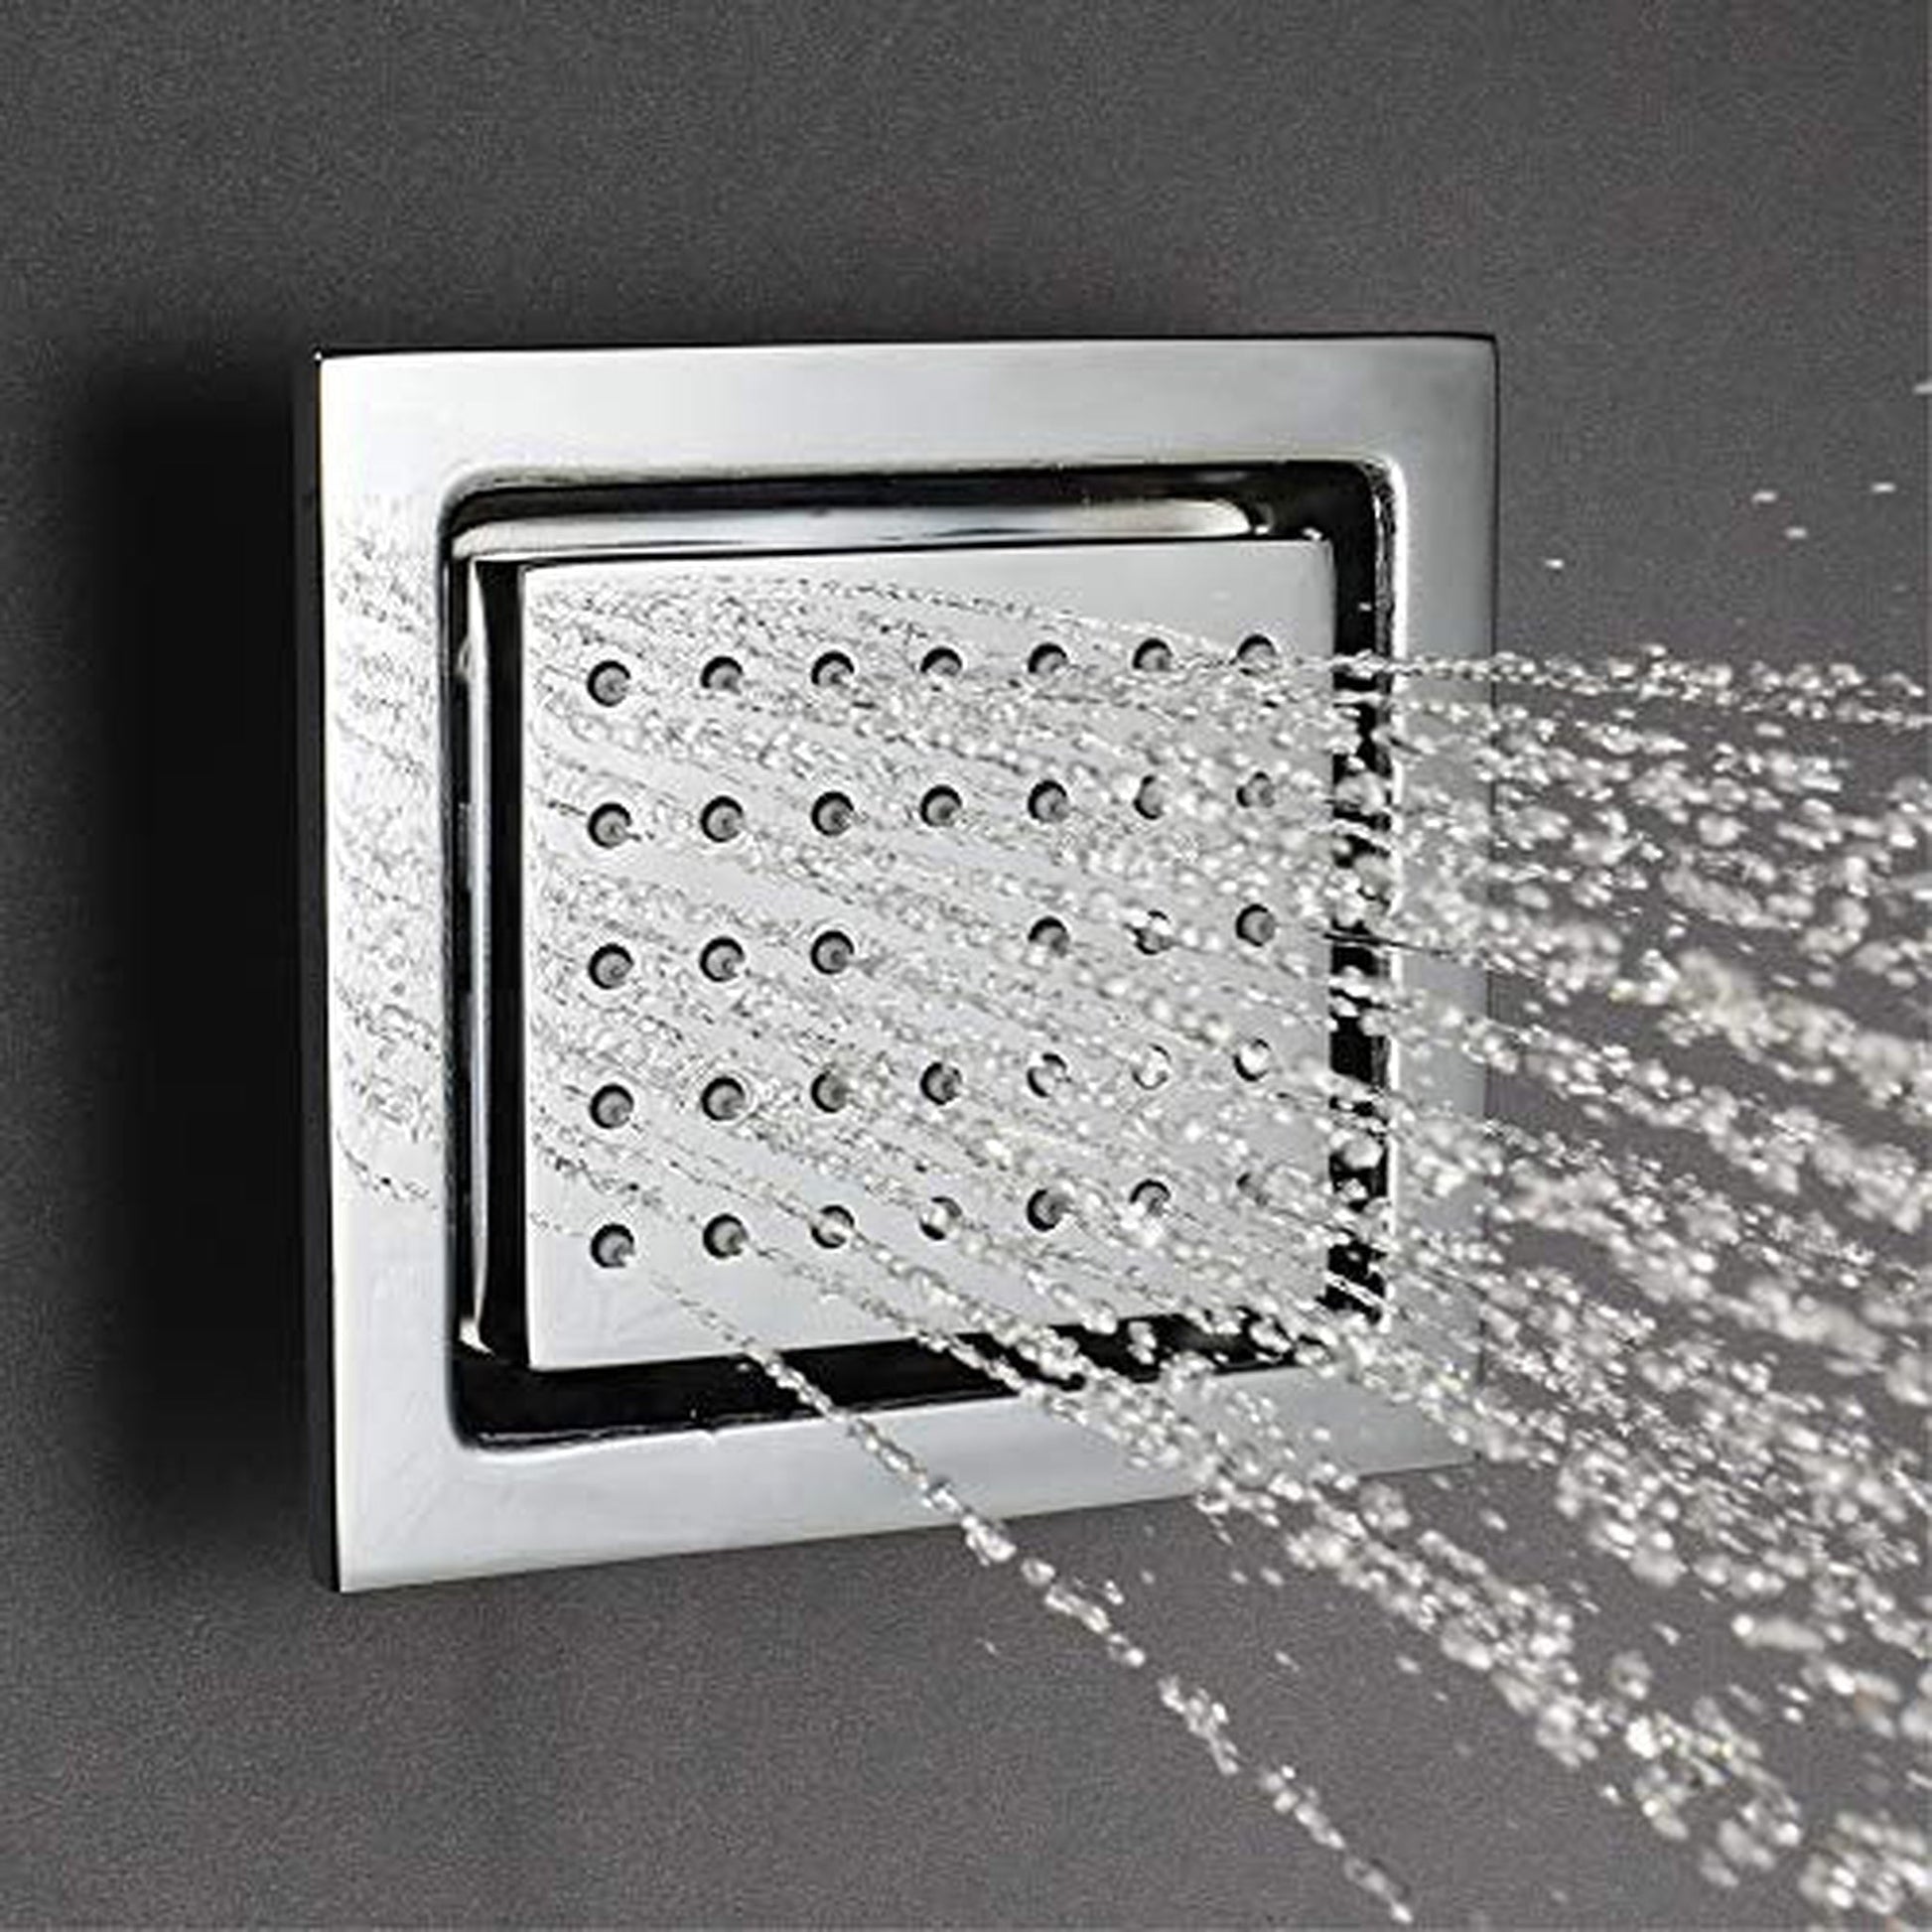 Fontana Martinique Creative Luxury Large Brushed Nickel Rectangular Ceiling Mounted LED Solid Brass Shower Head Rain Shower System With 6-Jet Body Sprays and Hand Shower